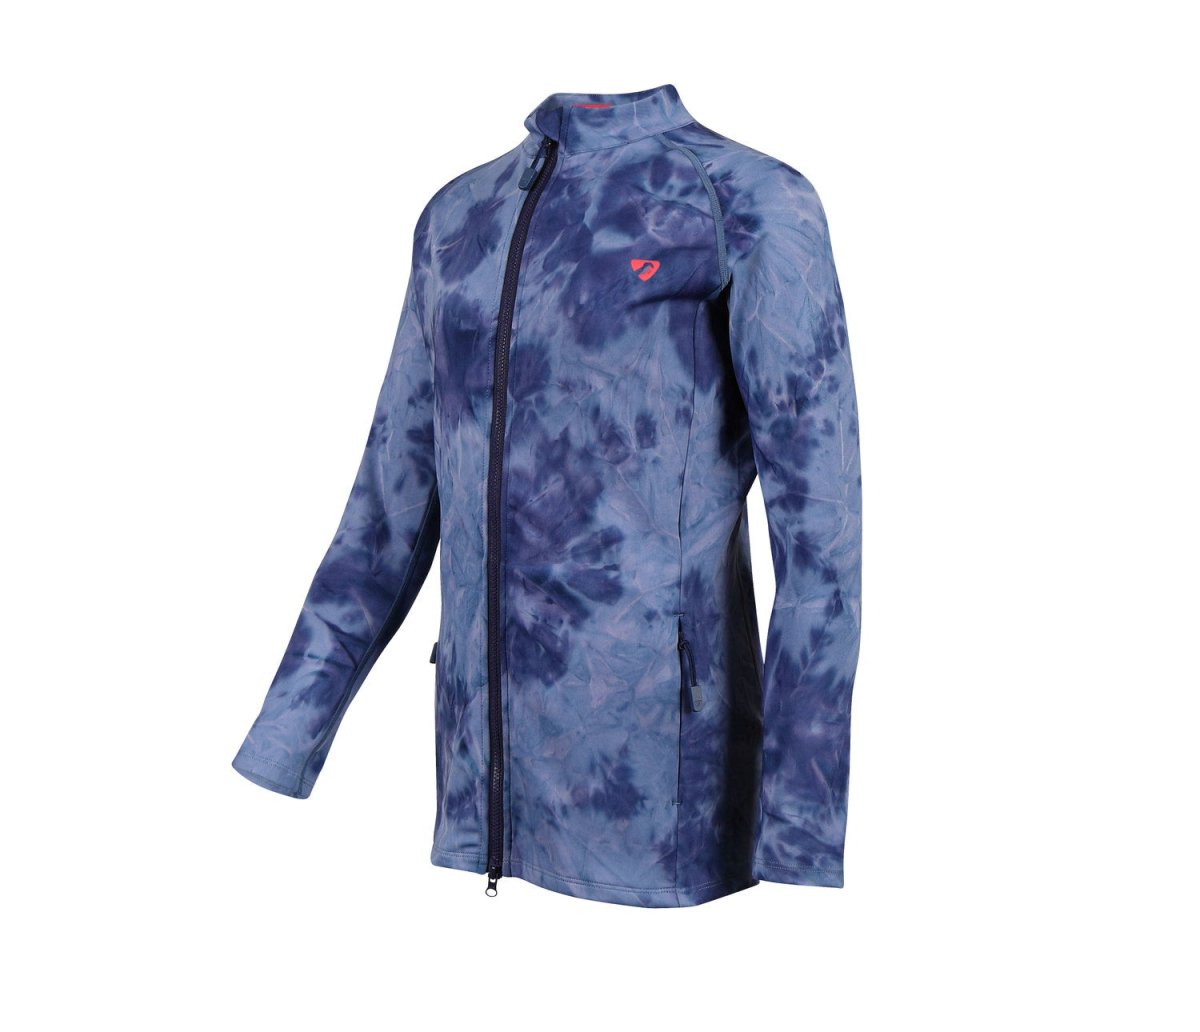 Aubrion SS24 Non-Stop Jacket - Young Rider - Navy TyeDye - 7/8 Years